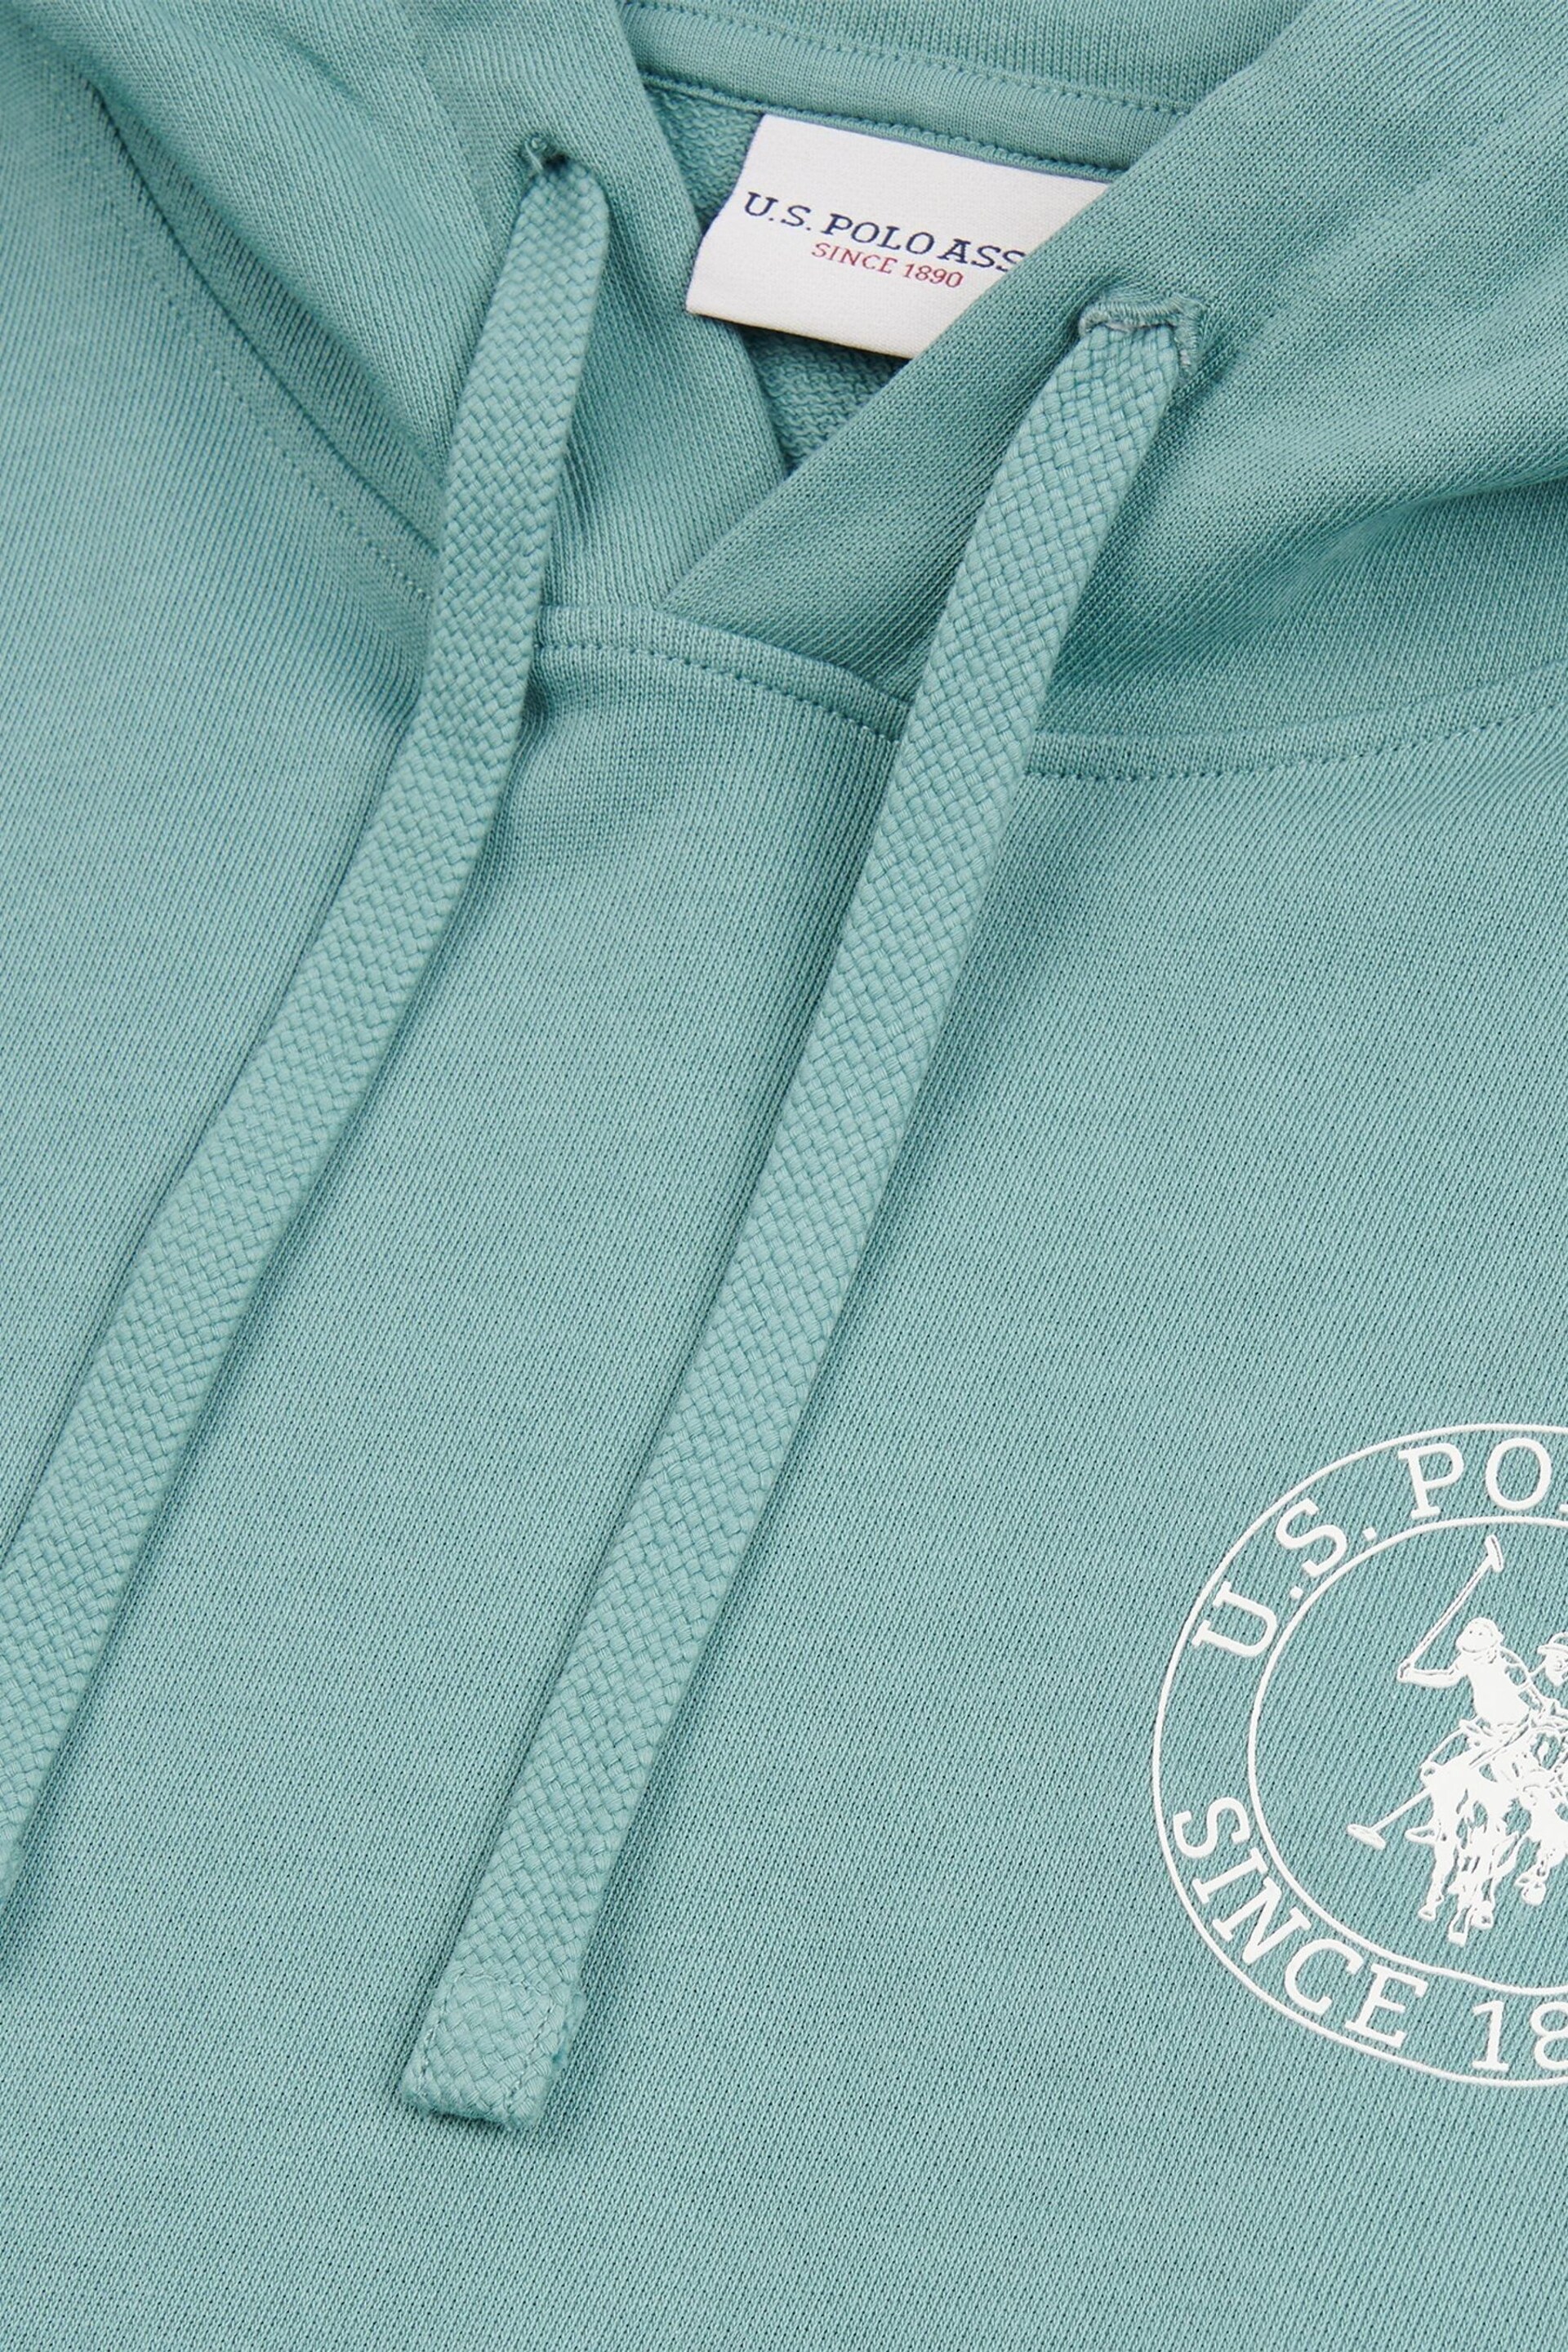 U.S. Polo Assn. Mens Blue Classic Fit Circle Print Hoodie - Image 9 of 10